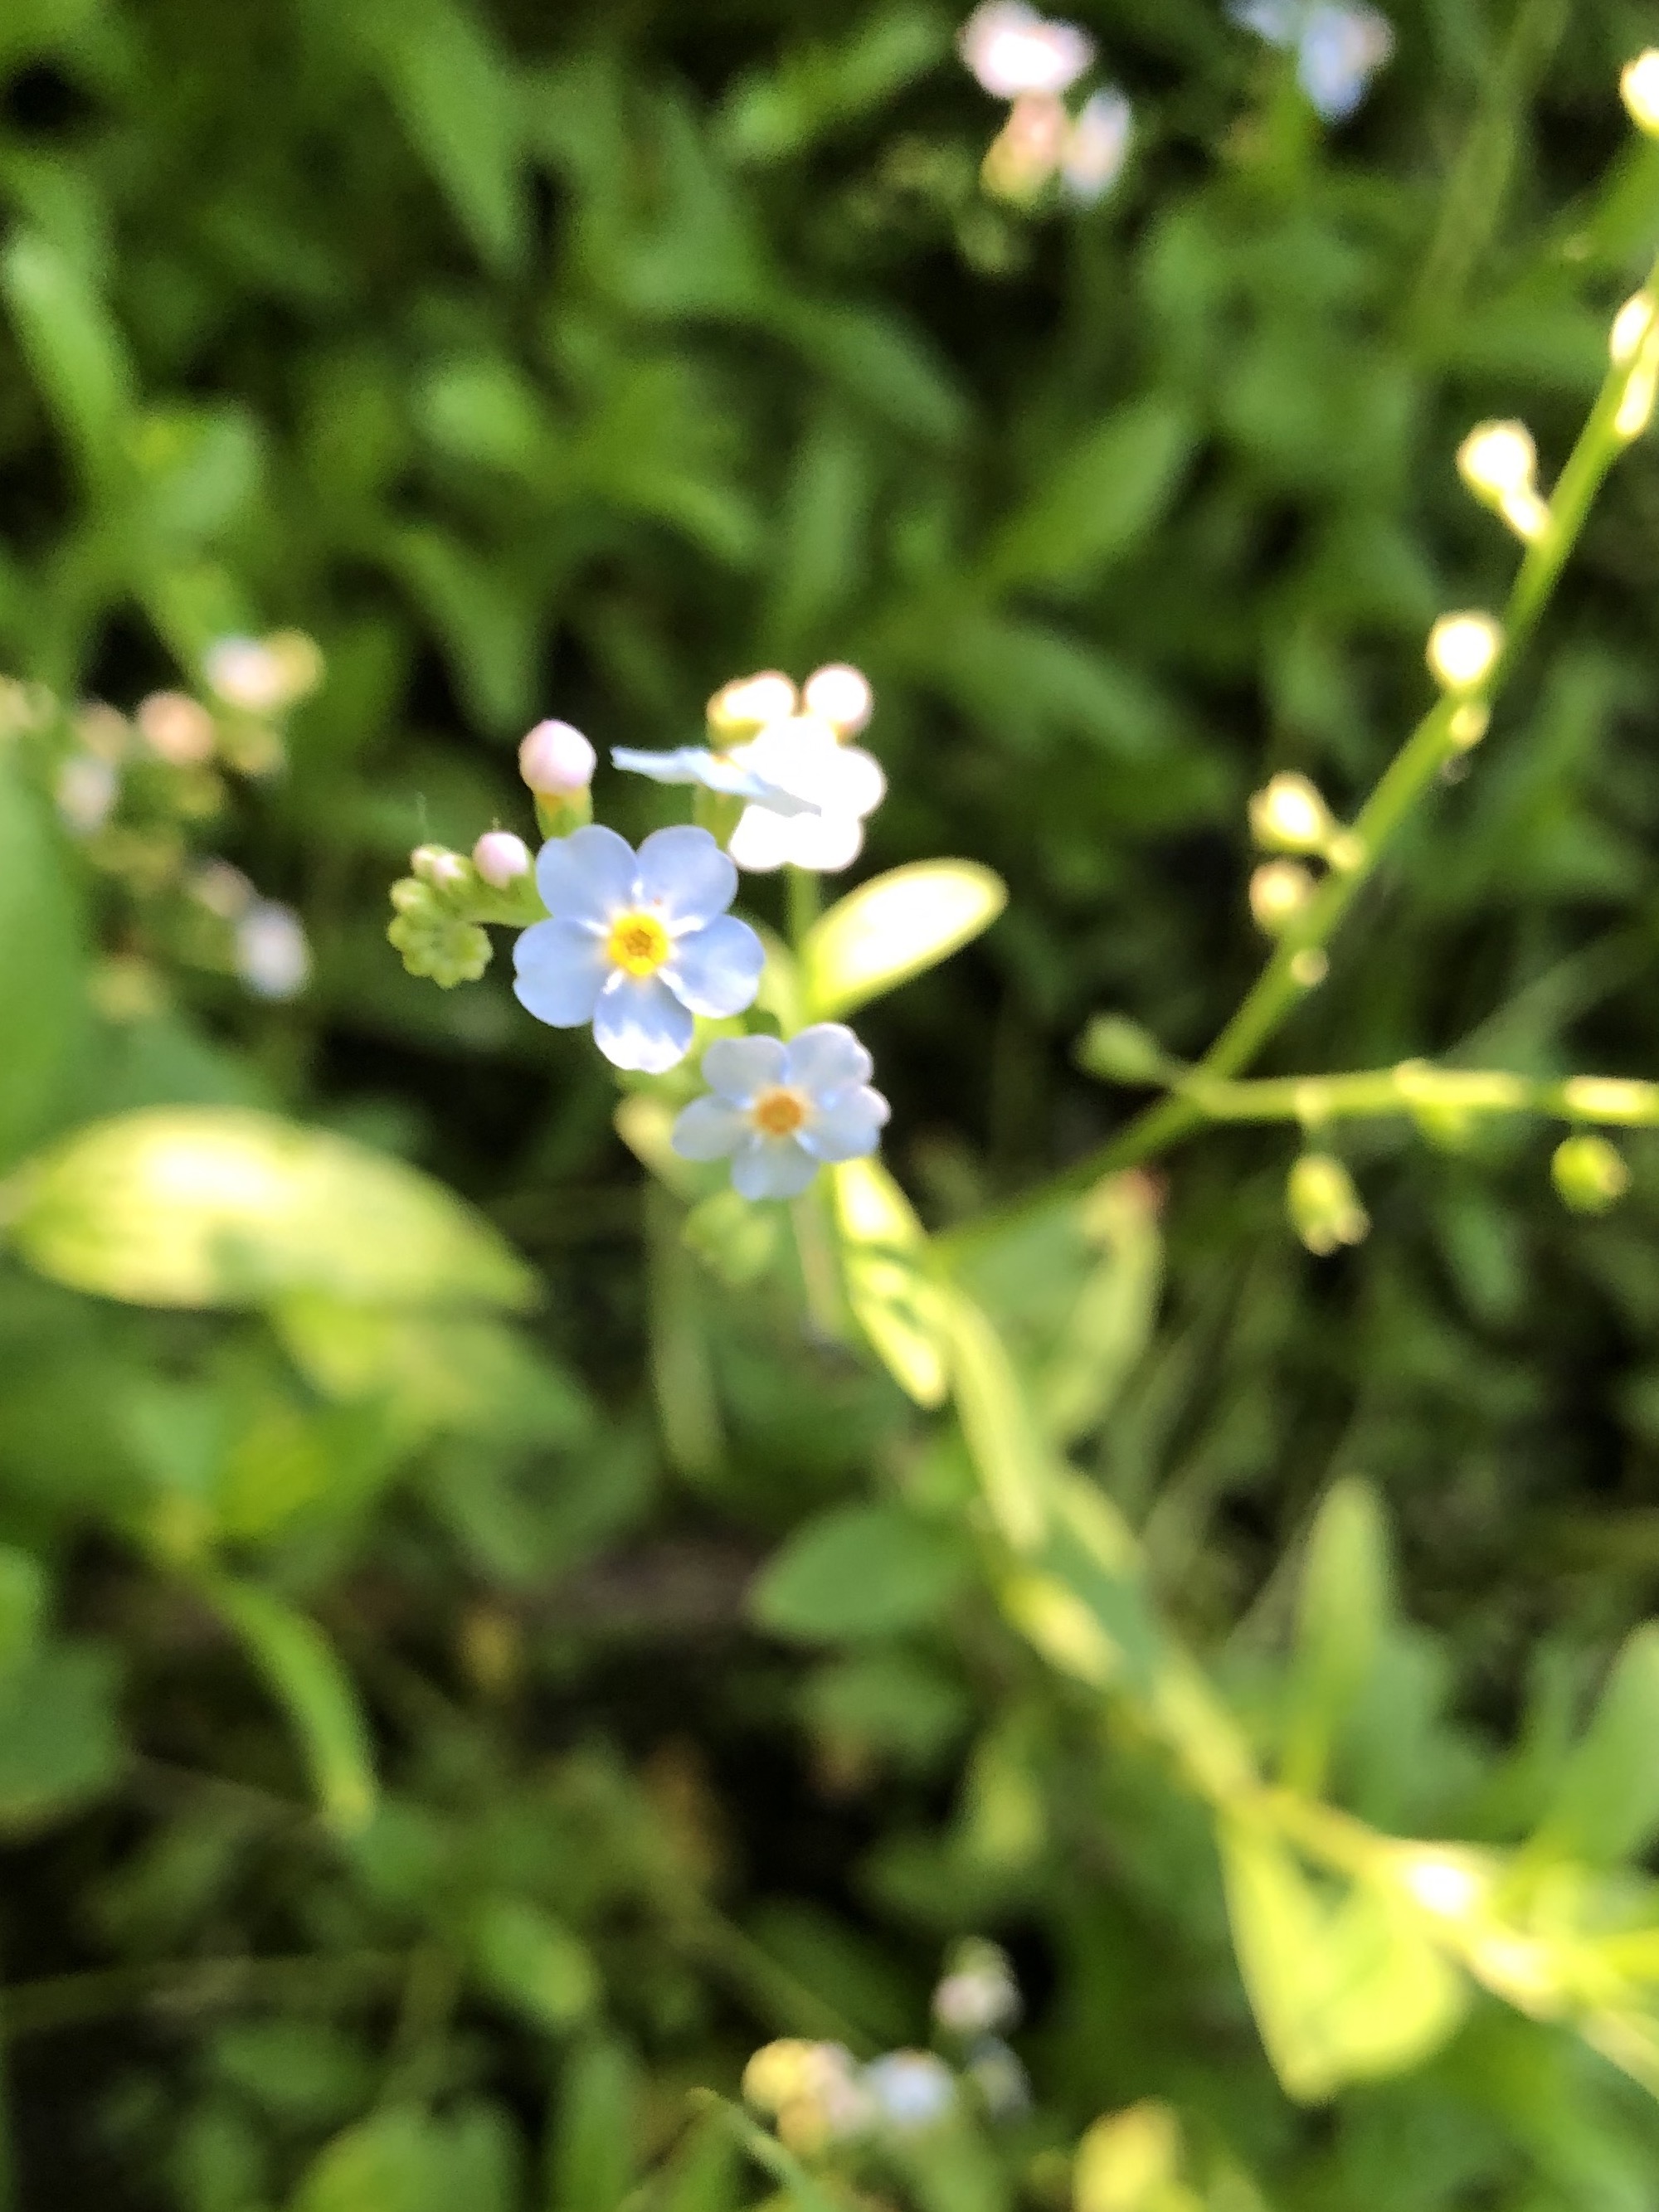 True Forget-me-not near cattails at Pickford Street stormwater outflow into Lake Wingra in Madison, Wisconsin on June 15, 2020.